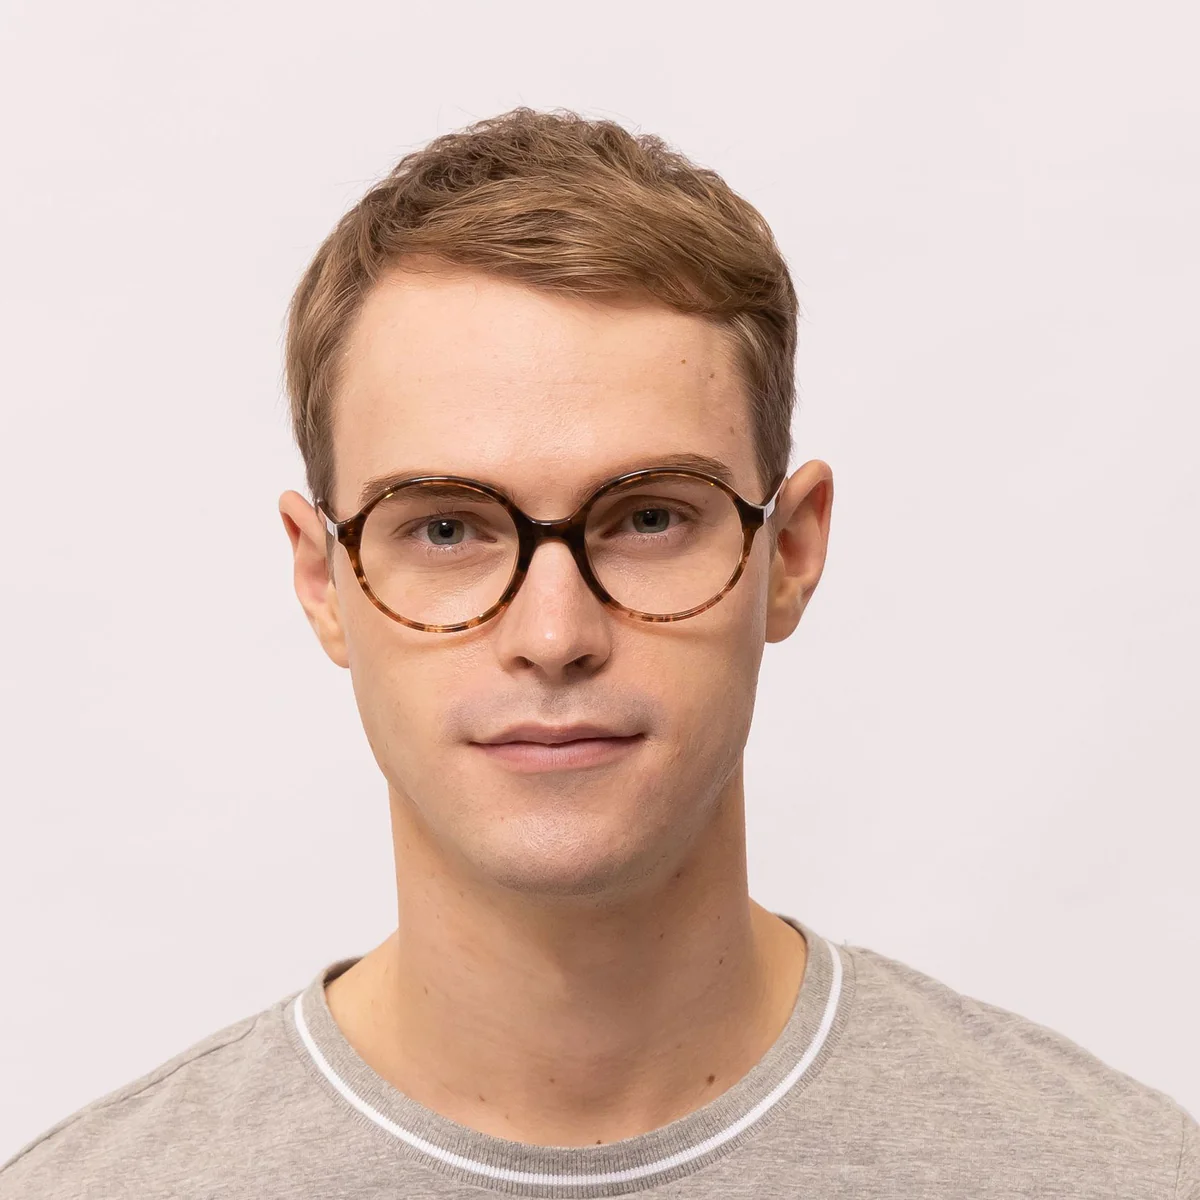 man wears round glasses that makes his eyes appear bigger